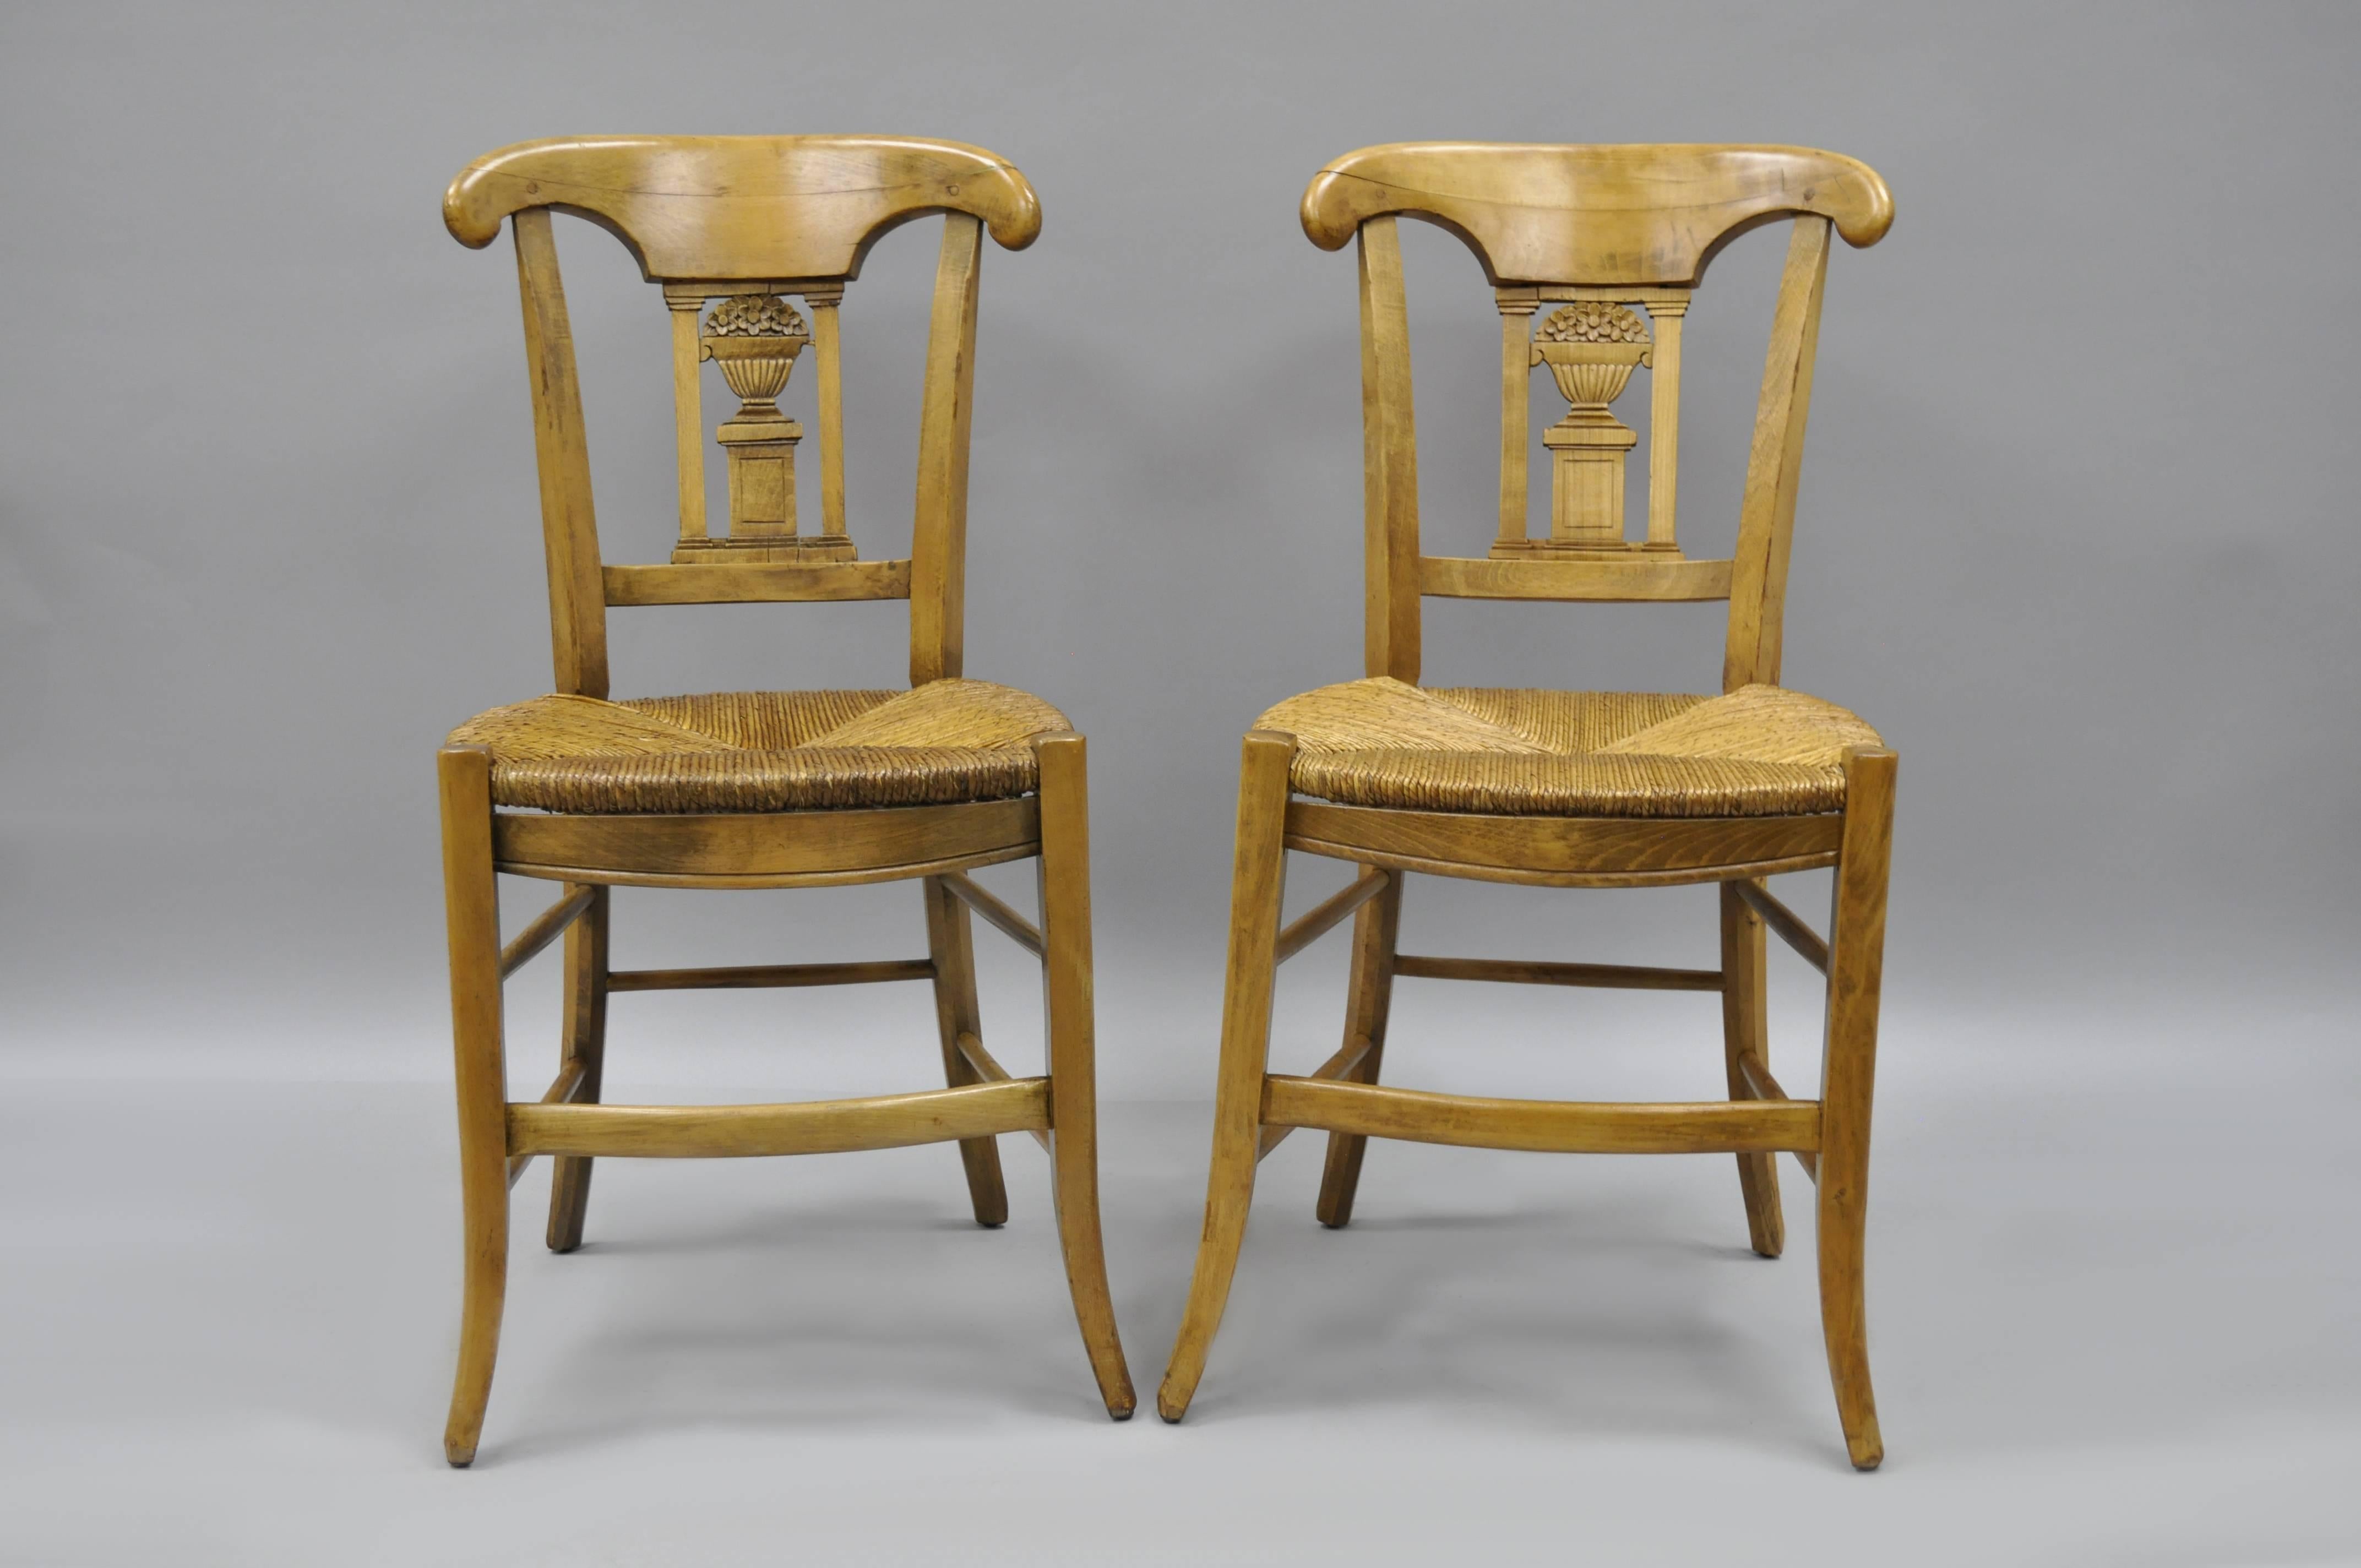 Cherrywood Primitive Country French Dining Chairs Woven Rush Seats Set of Four 3